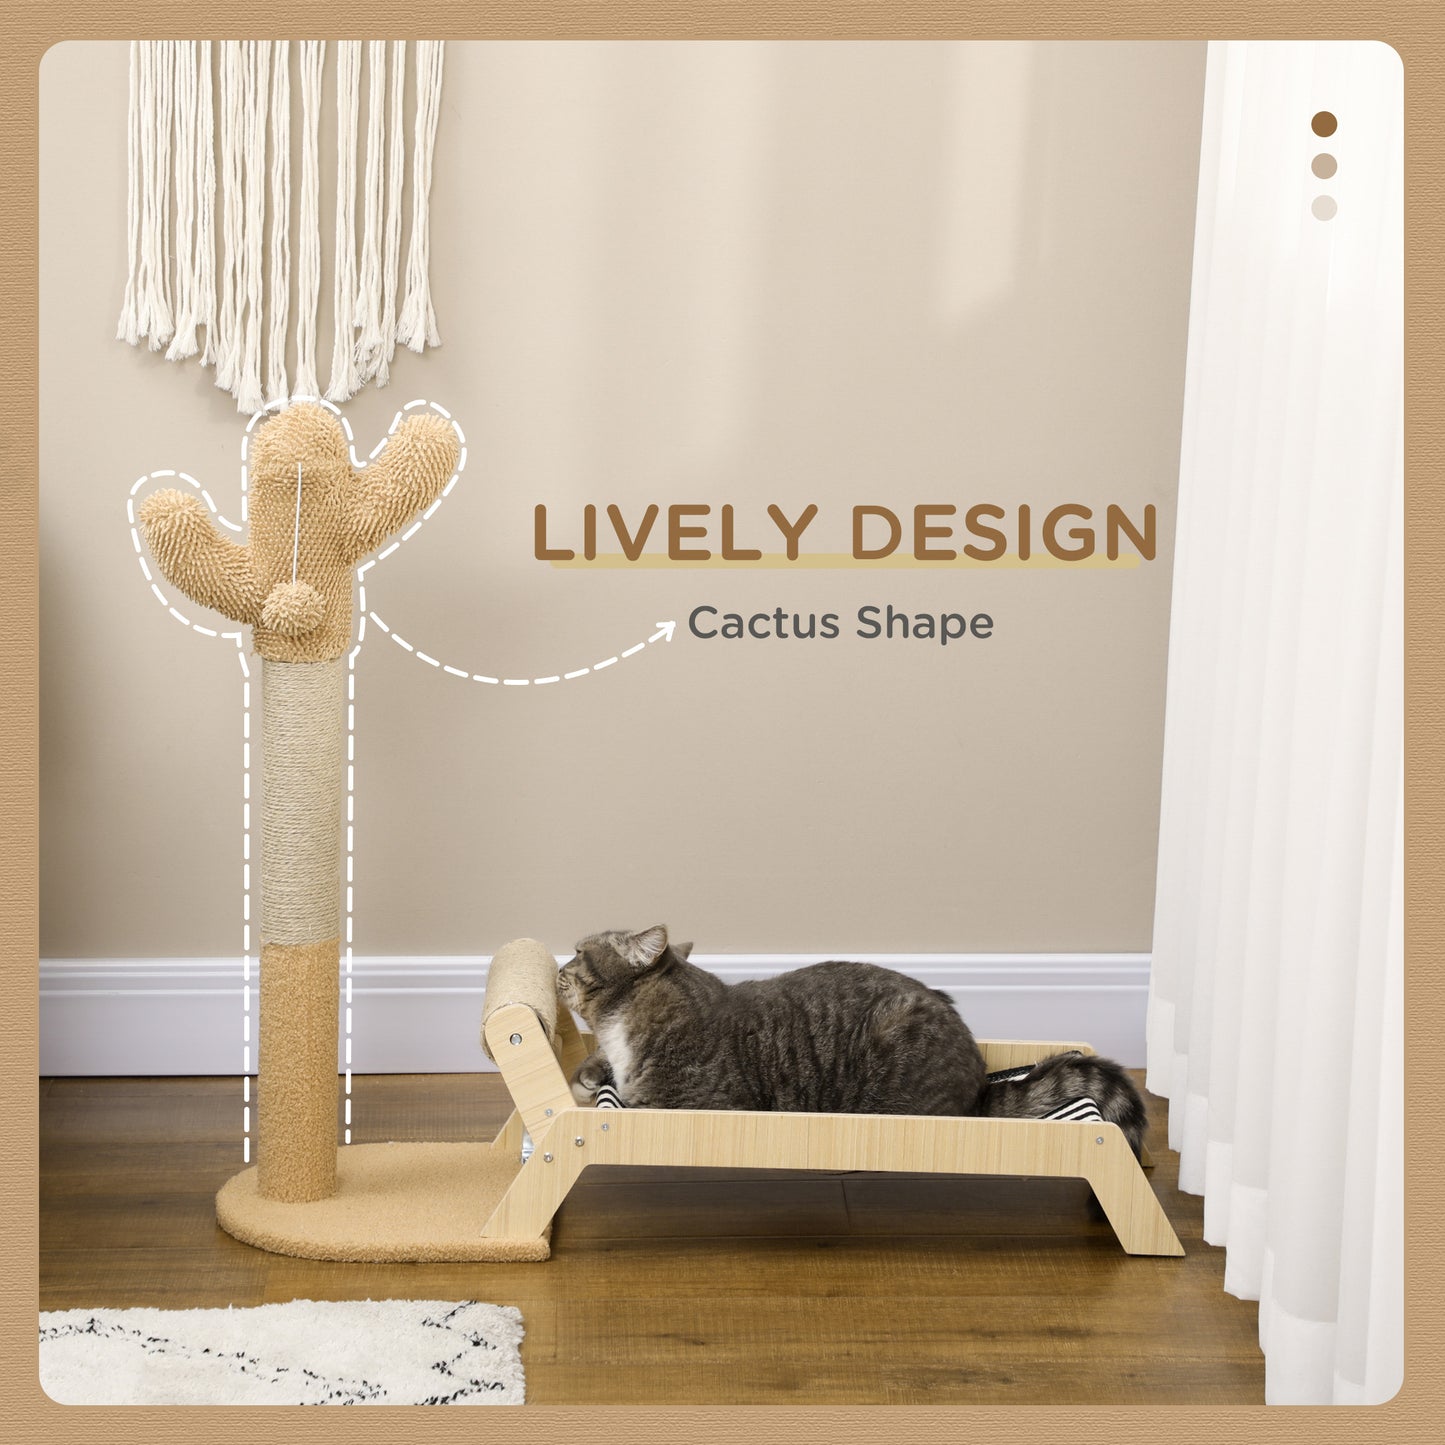 PawHut 2 in 1 Cat Scratching Post with Bed, Cat Condo Tree Tower with Cactus Post, Hammock Bed for Indoor Cats and Kittens - Brown